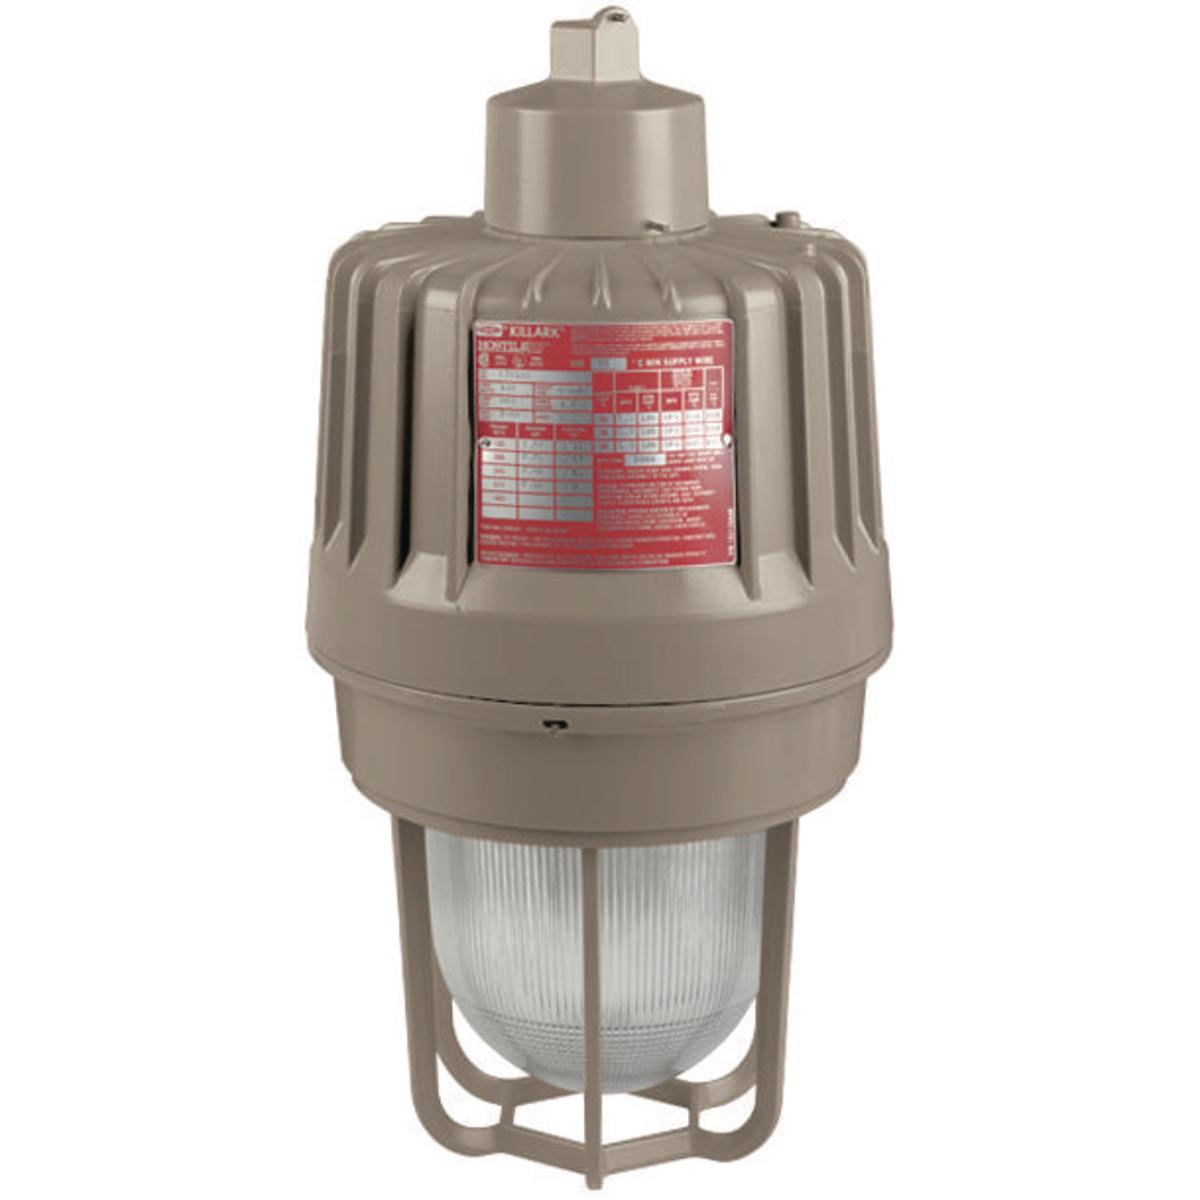 Hubbell EZP175A2G 175W 480V Pulse-Start Metal Halide 3/4" Pendant with Guard  ; Three light sources – High Pressure Sodium (50-400W), Metal Halide (70-400W) and Pulse Start Metal Halide (175-400W) ; Mounting choice –Pendant, ceiling, 25˚ stanchion or 90˚ wall mount, all wi